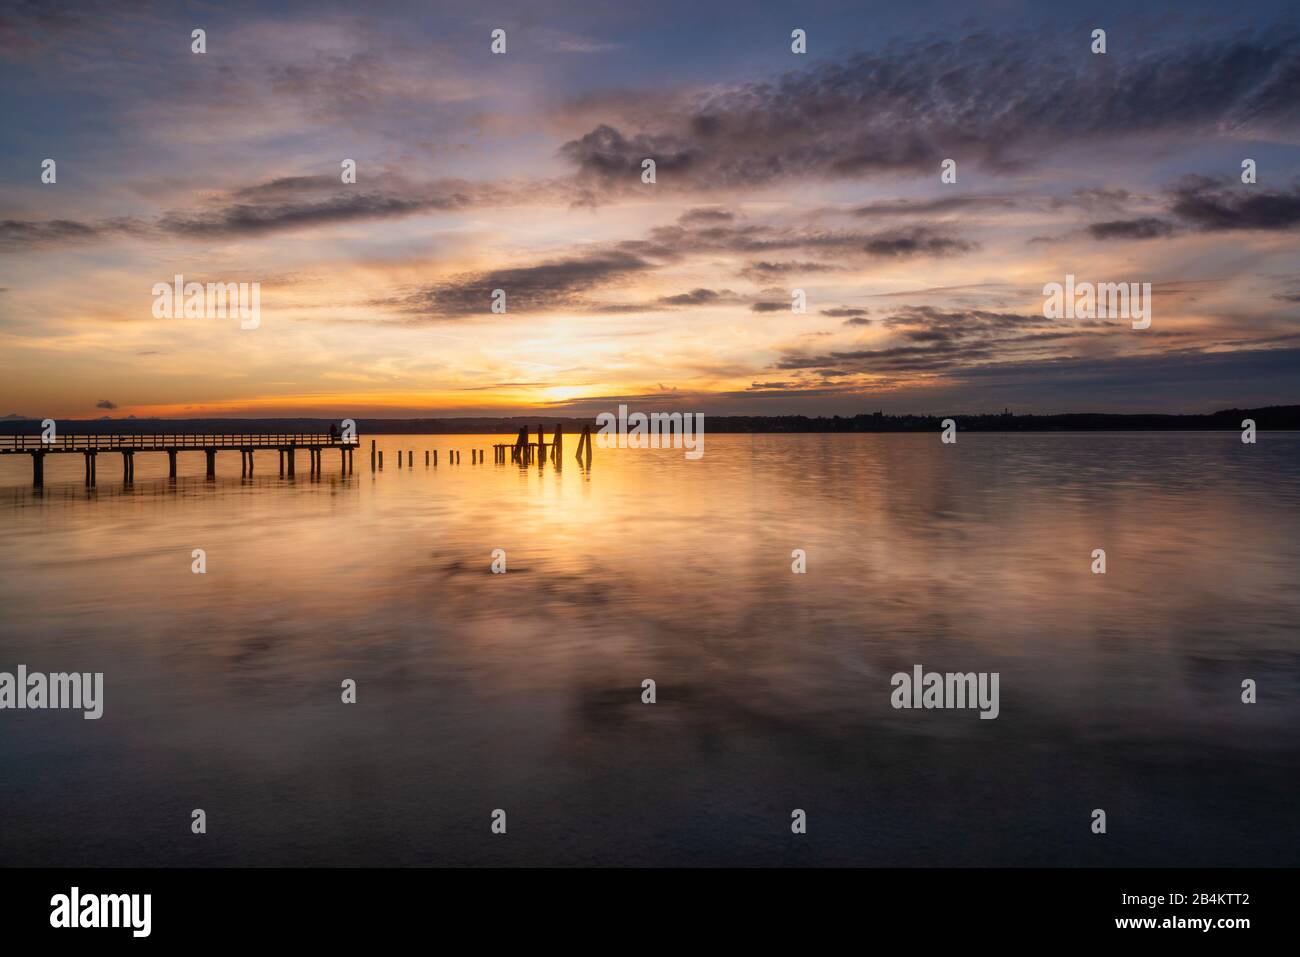 Inning community, Buch am Ammersee, beach, sunset with jetty Stock Photo